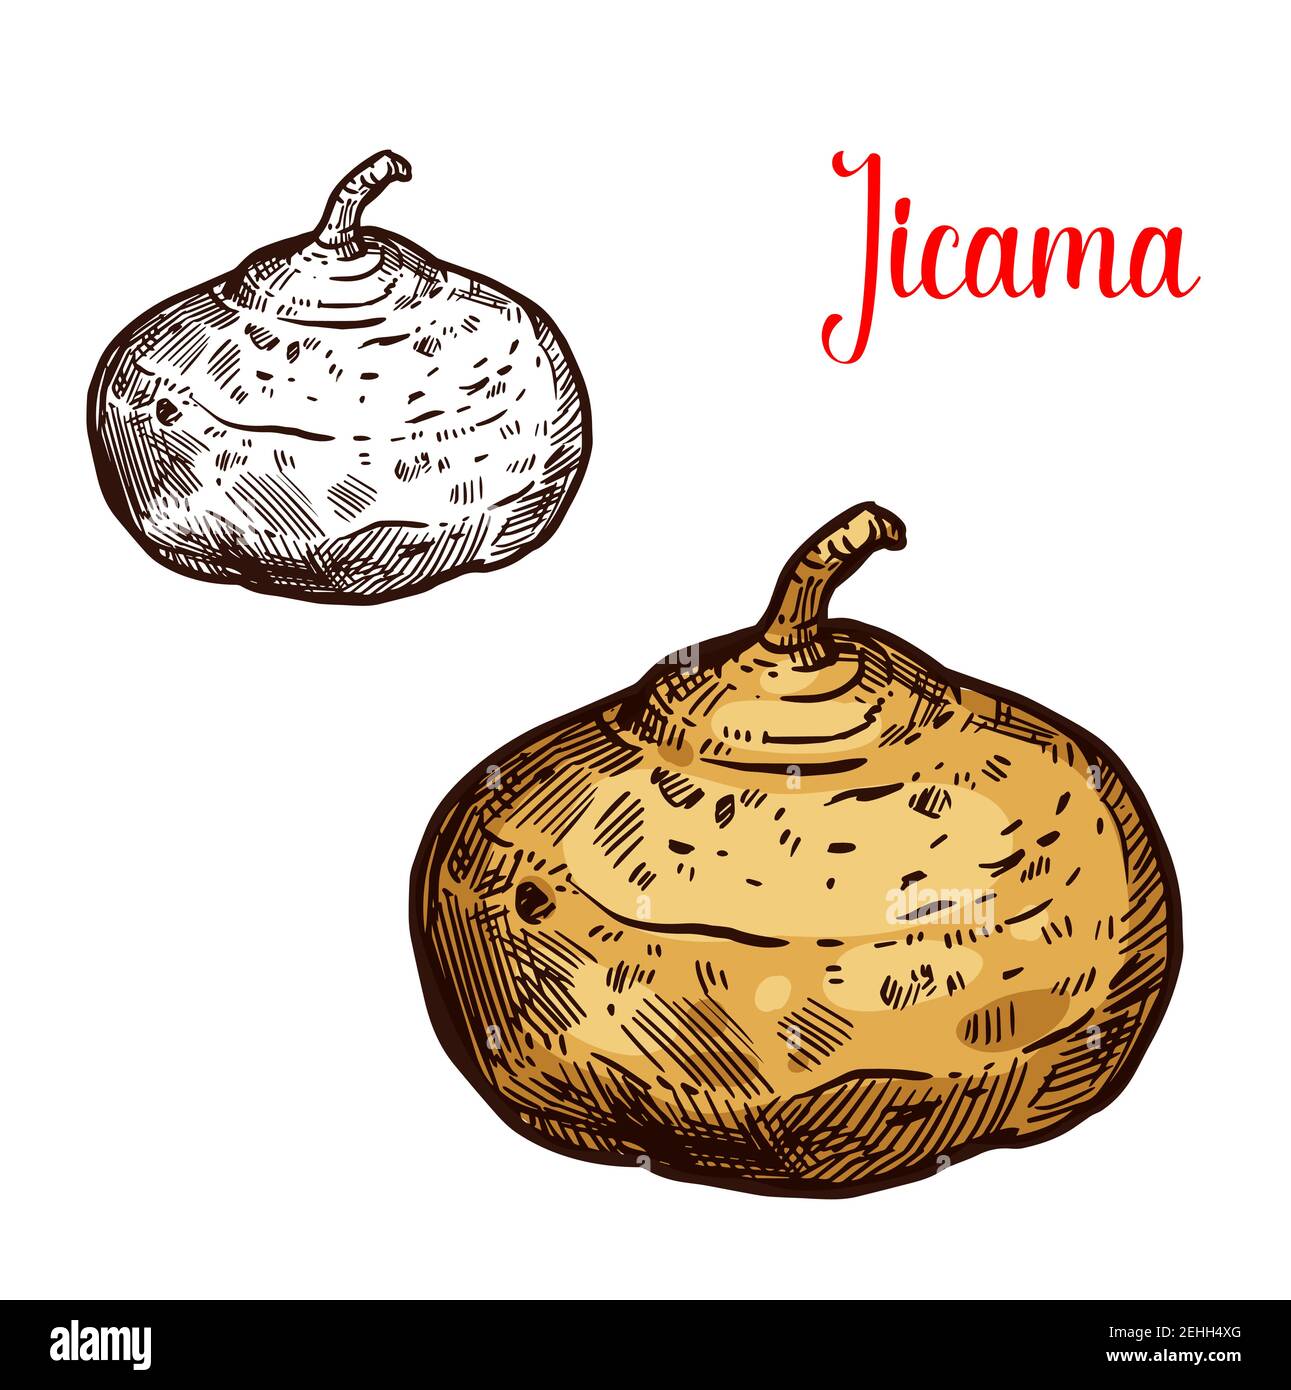 Jicama vector sketch. Botanical design of Mexican yam bean or turnip vegetable or Pachyrhizus erosus tropical fruit for food or farmer market and agri Stock Vector